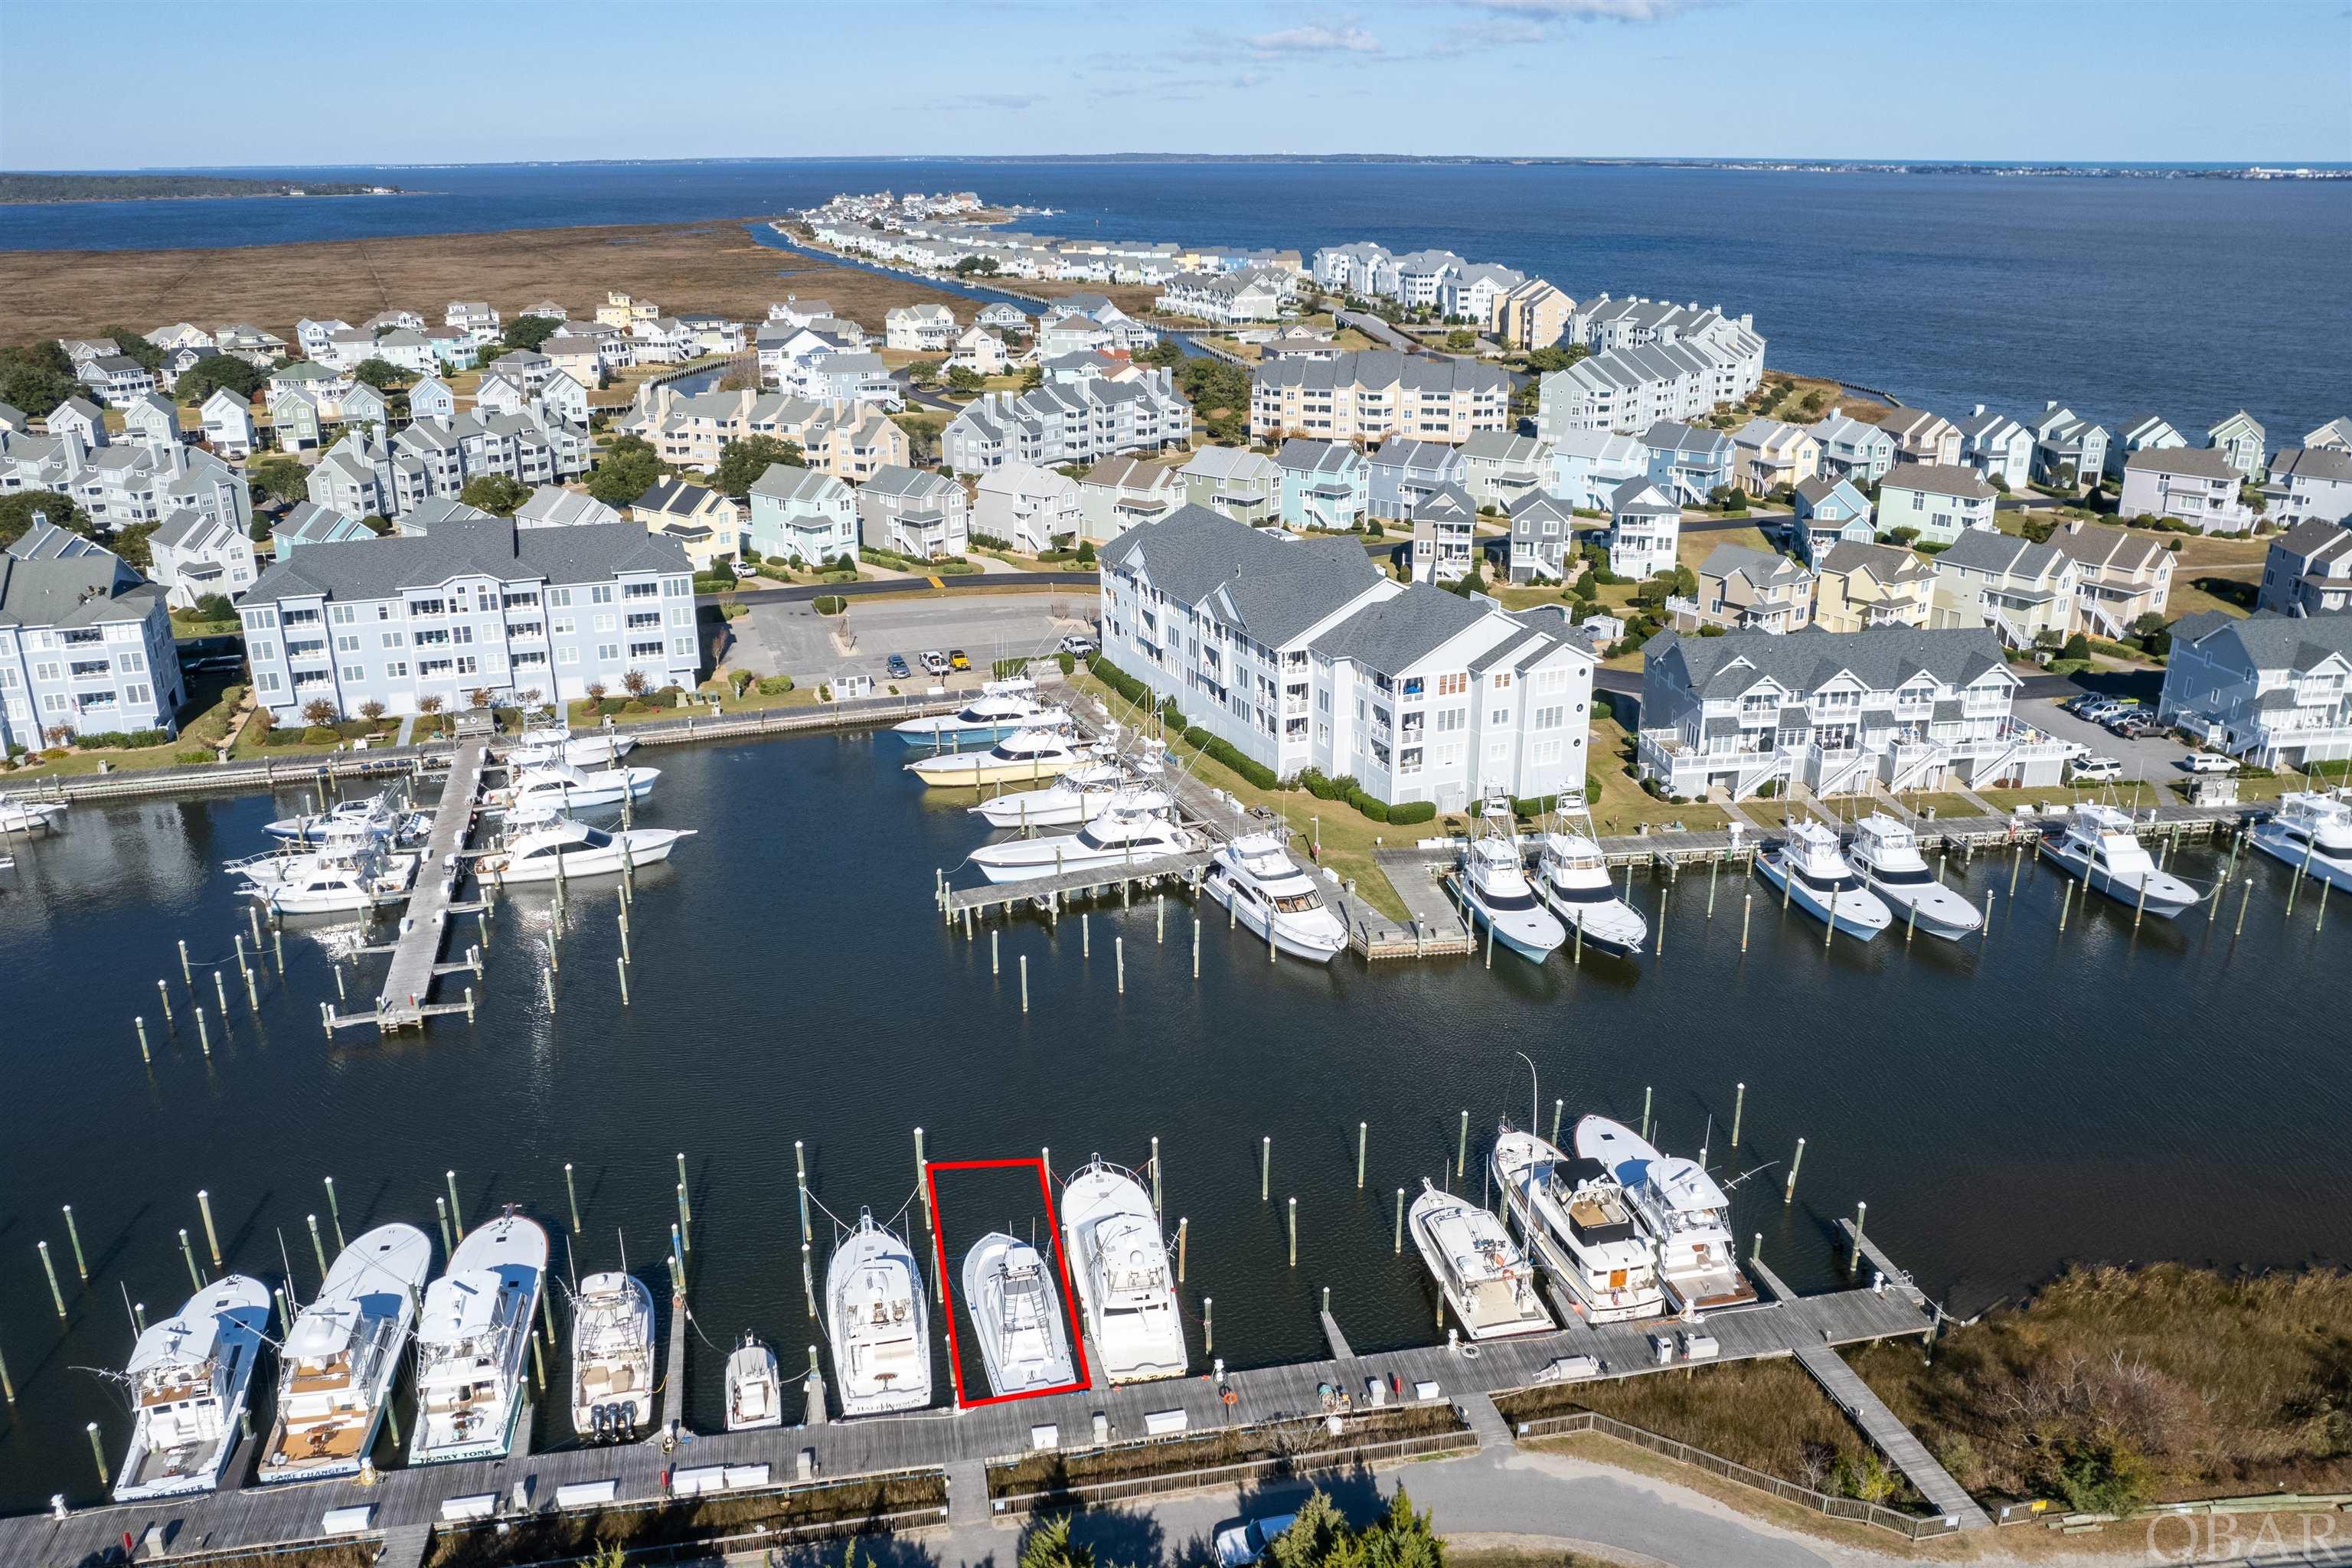 Located on E Dock, this 65FT x 21 W boat slip has location value with easy sound access and parking.  Pirate's Cove Marina is a protected, deep water, full service marina with 195 slips and a charter fleet of sport fish boats for offshore, nearshore and inlet fishing.  Pirate's Cove Marina is one of the largest world-class marinas on the East Coast with a high level of experienced charter sport fishing captains and crew. Pirate's Cove Marina offers: a fuel dock for non-ethanol gas and diesel, slips with in-slip fueling, private fish cleaning houses, showers, Ship's Store for light provisioning, an on-site full-service restaurant and Tiki Bar, and annual fishing tournaments.  Pirate's Cove Marina is approximately eight miles inside and north of Oregon Inlet via a deepwater, well-marked channel. The fixed bridge clearance of the Manteo/Nags Head causeway is 65 feet at mean high tide.